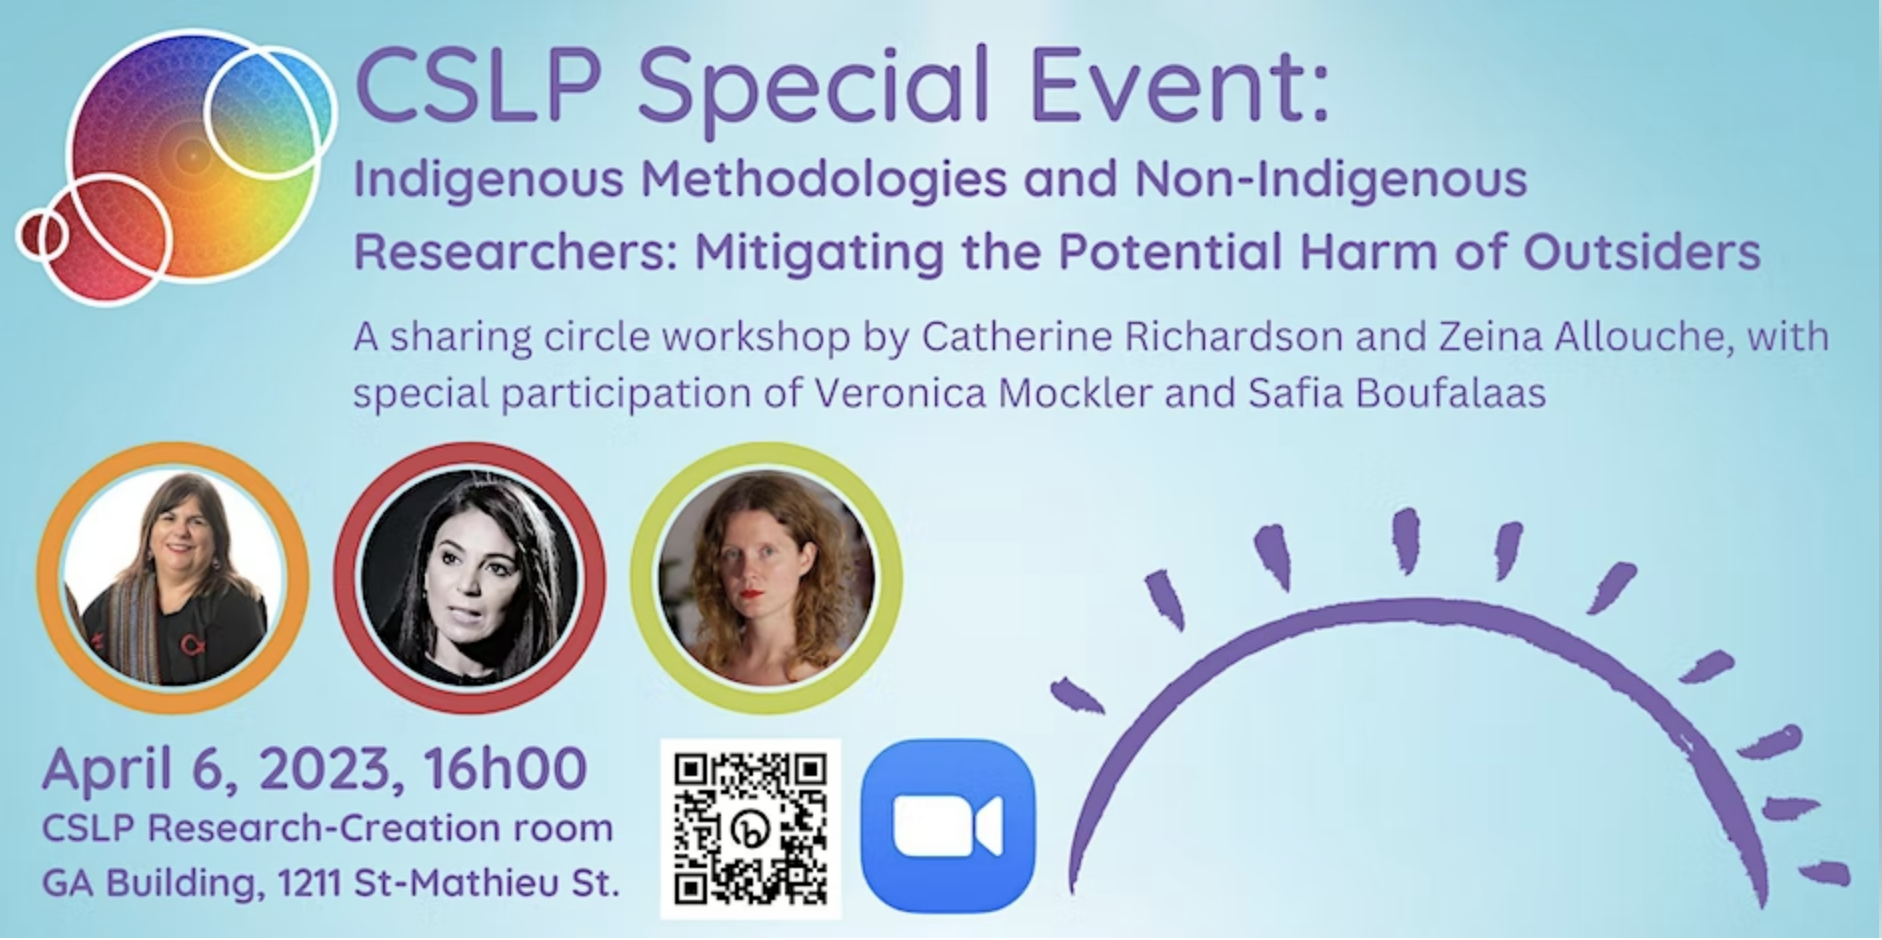 Banner for CSLP special event - sharing circle workshop on Indigenous Methodologies